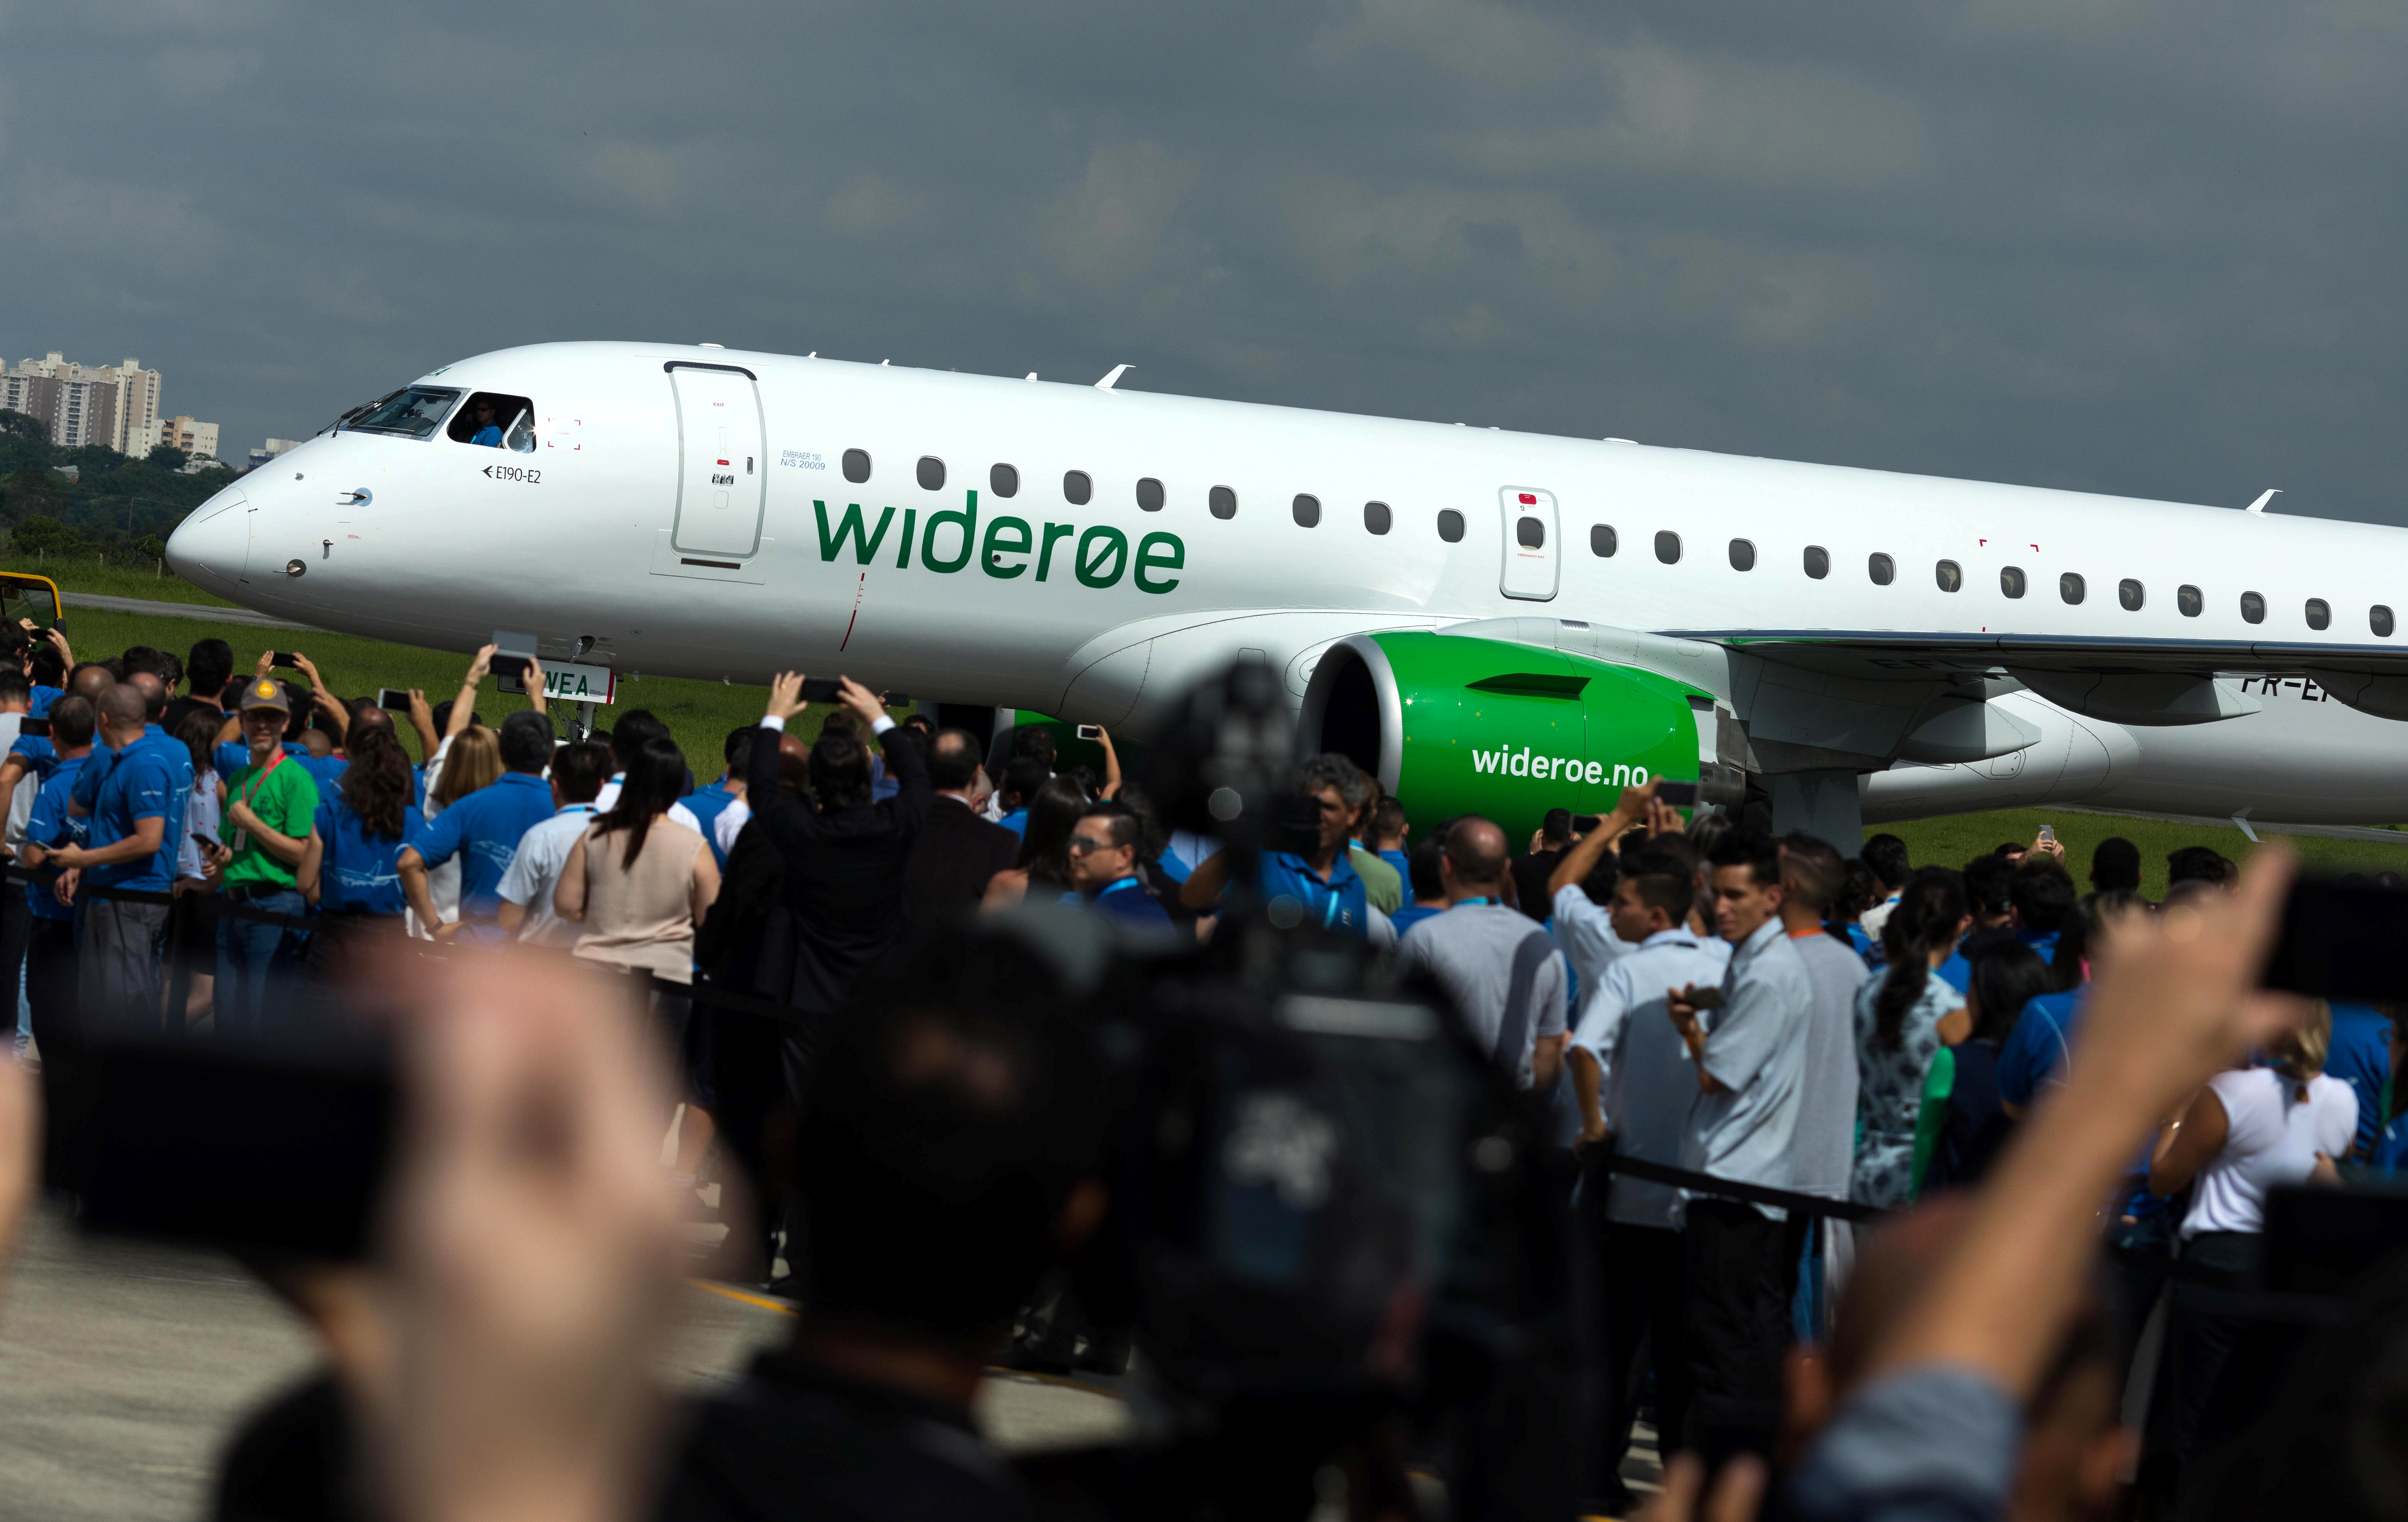 The E2-190 jet is seen during a ceremony as Embraer delivers first jet to Norway's Wideroe at the company's headquarters in Sao Jose dos Campos